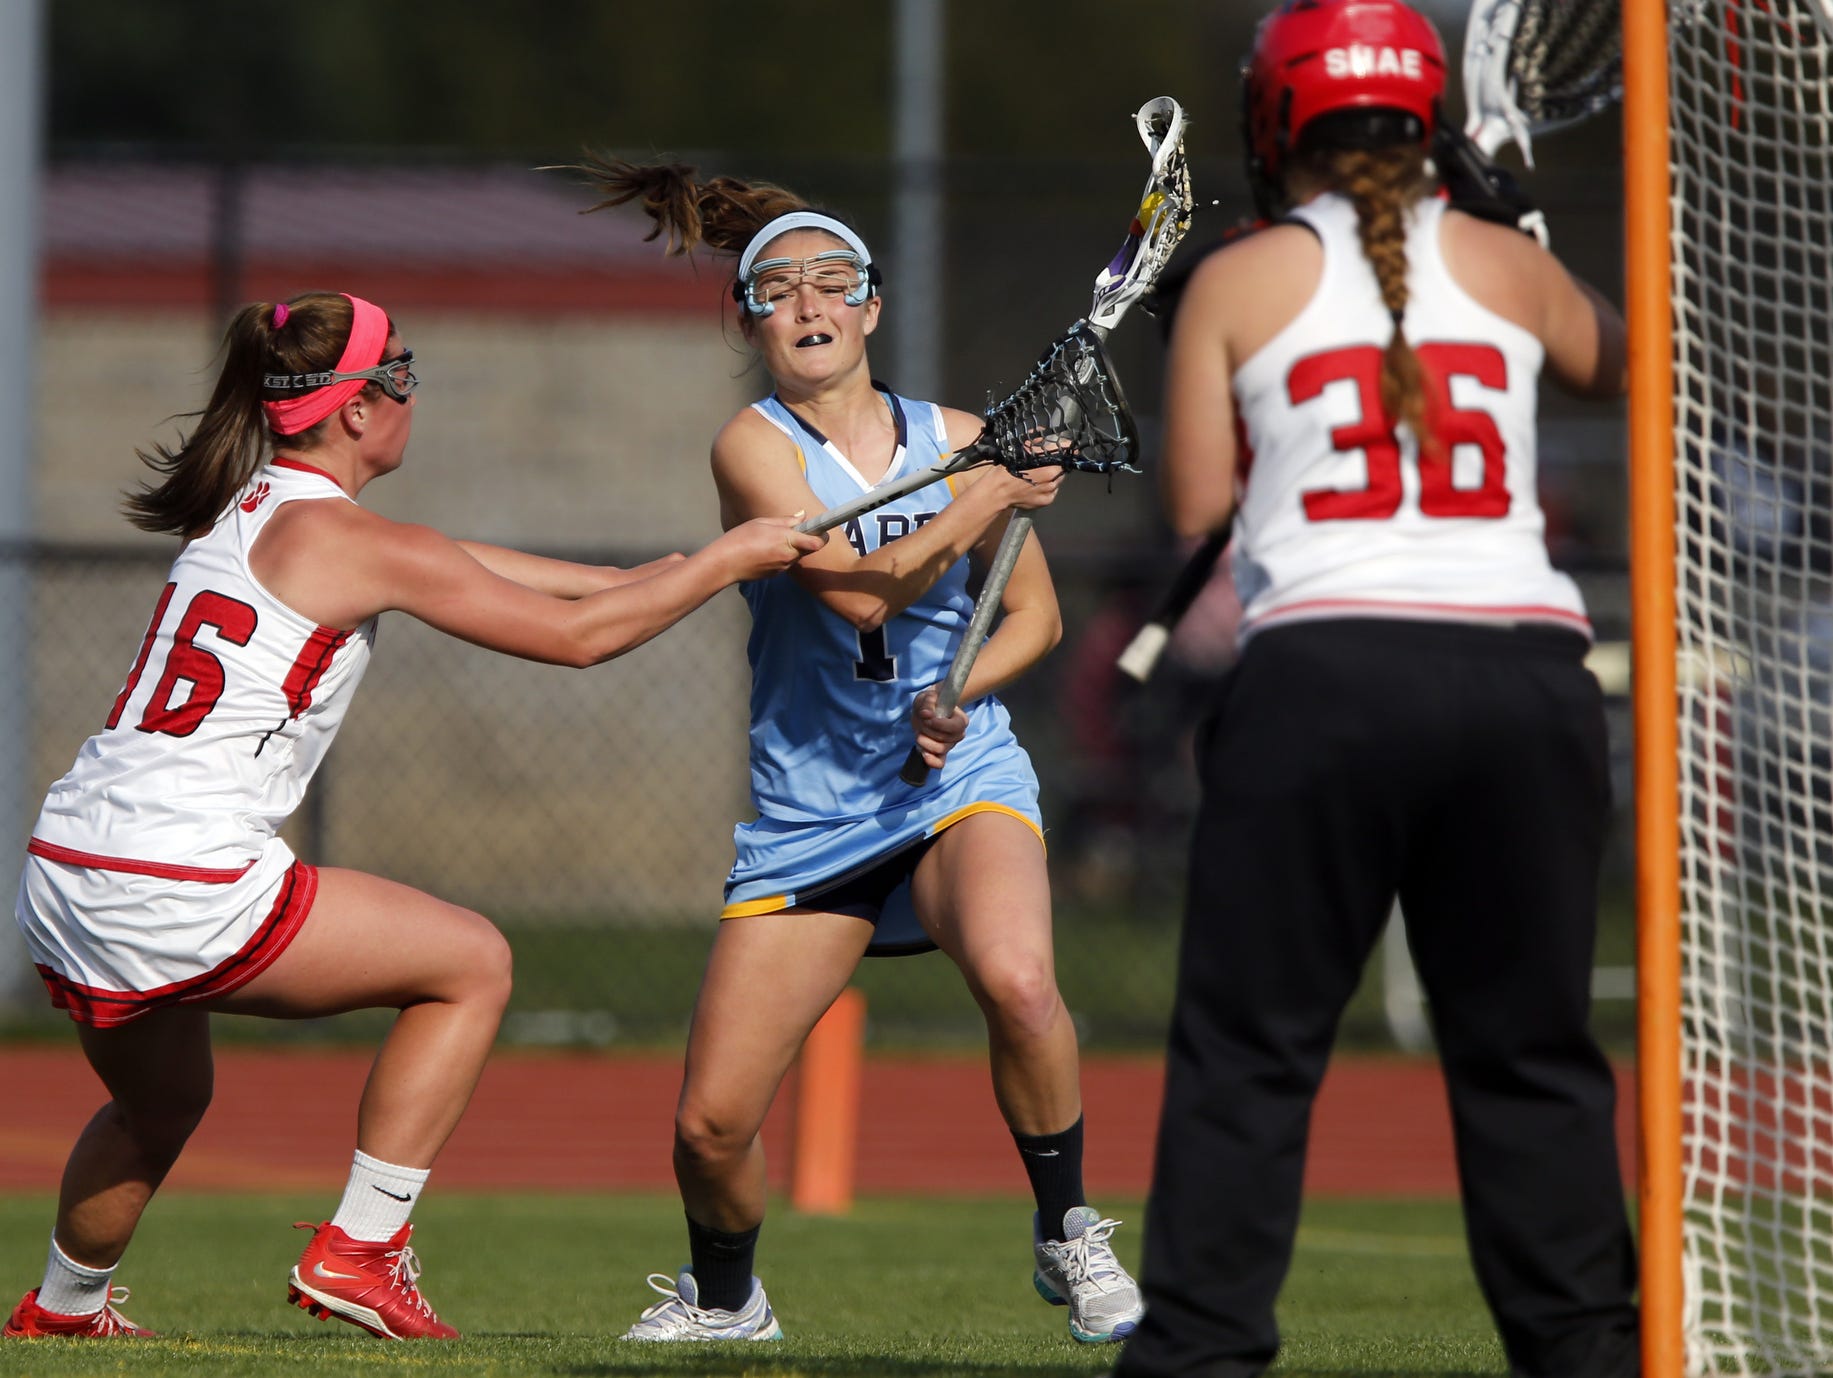 Cape Henlopen's Lizzie Frederick (1) had eight goals and six assists as the Vikings cruised past Caravel 20-7 Thursday night.